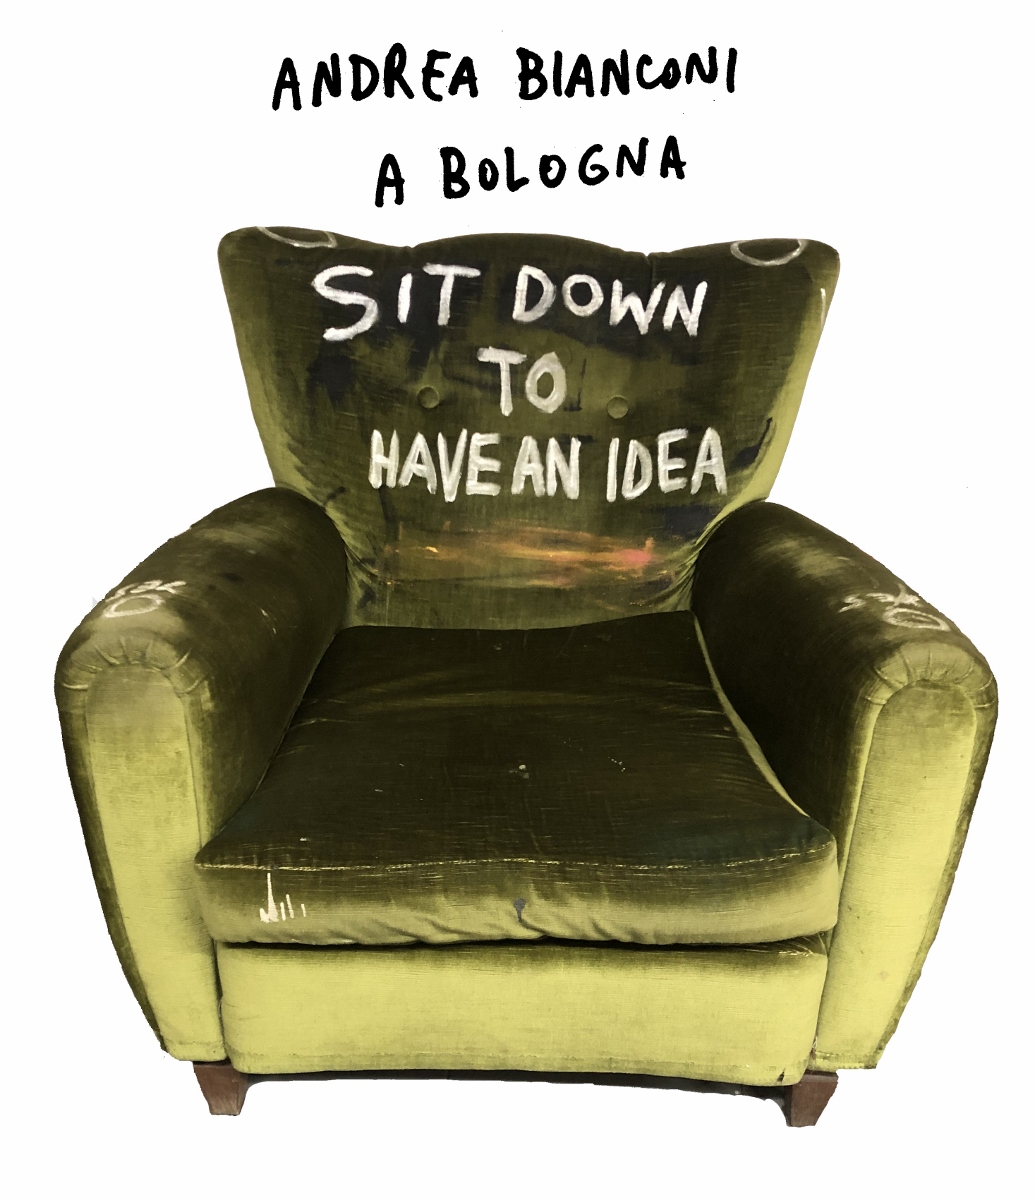 Andrea Bianconi - Sit down to have an idea